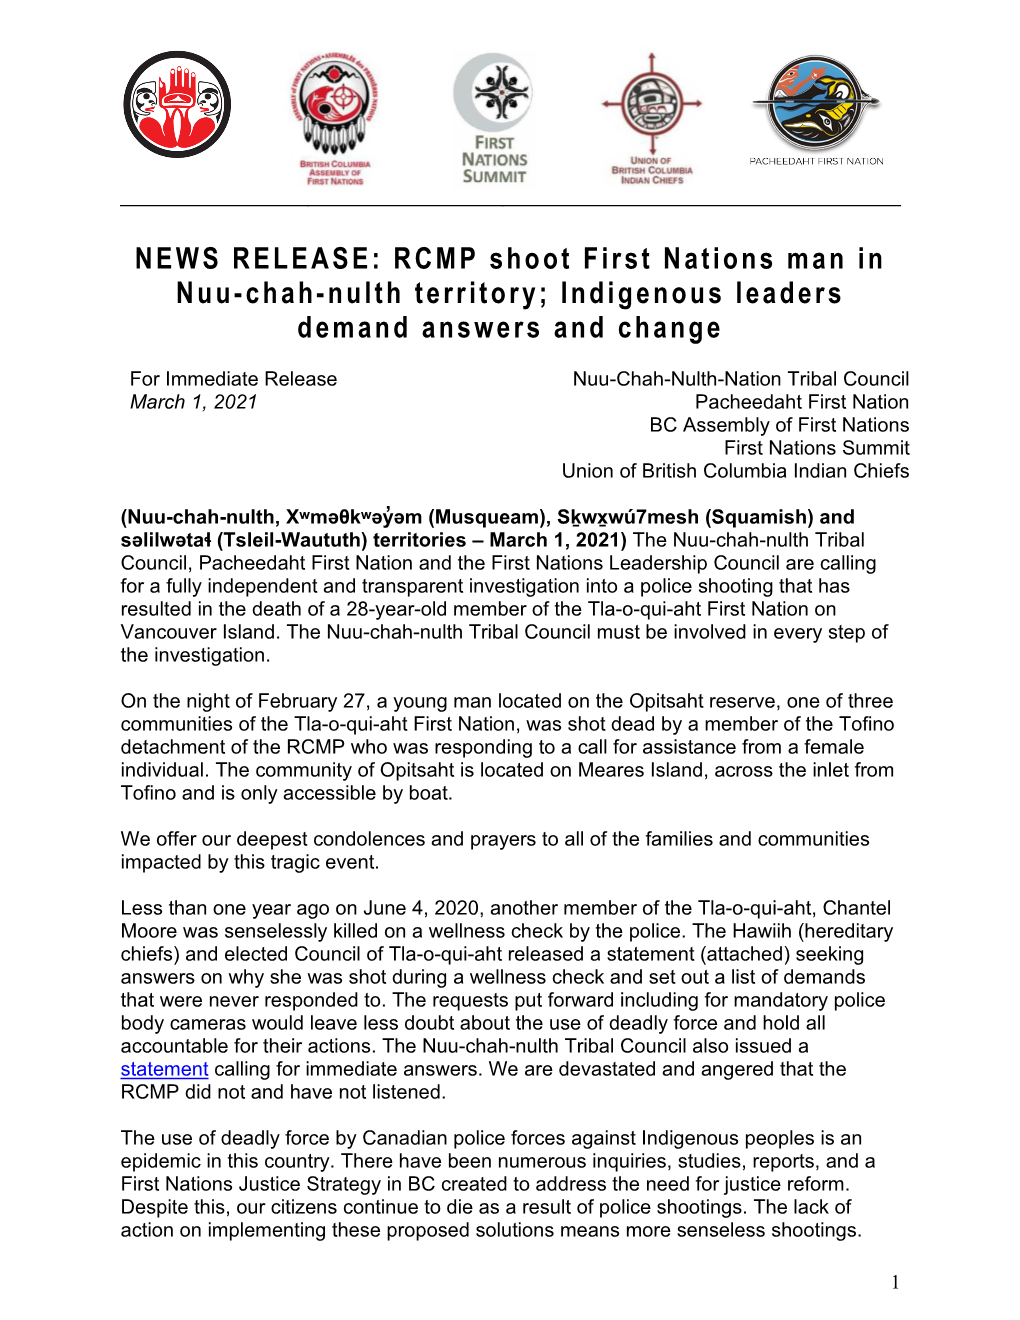 NEWS RELEASE: RCMP Shoot First Nations Man in Nuu-Chah-Nulth Territory; Indigenous Leaders Demand Answers and Change